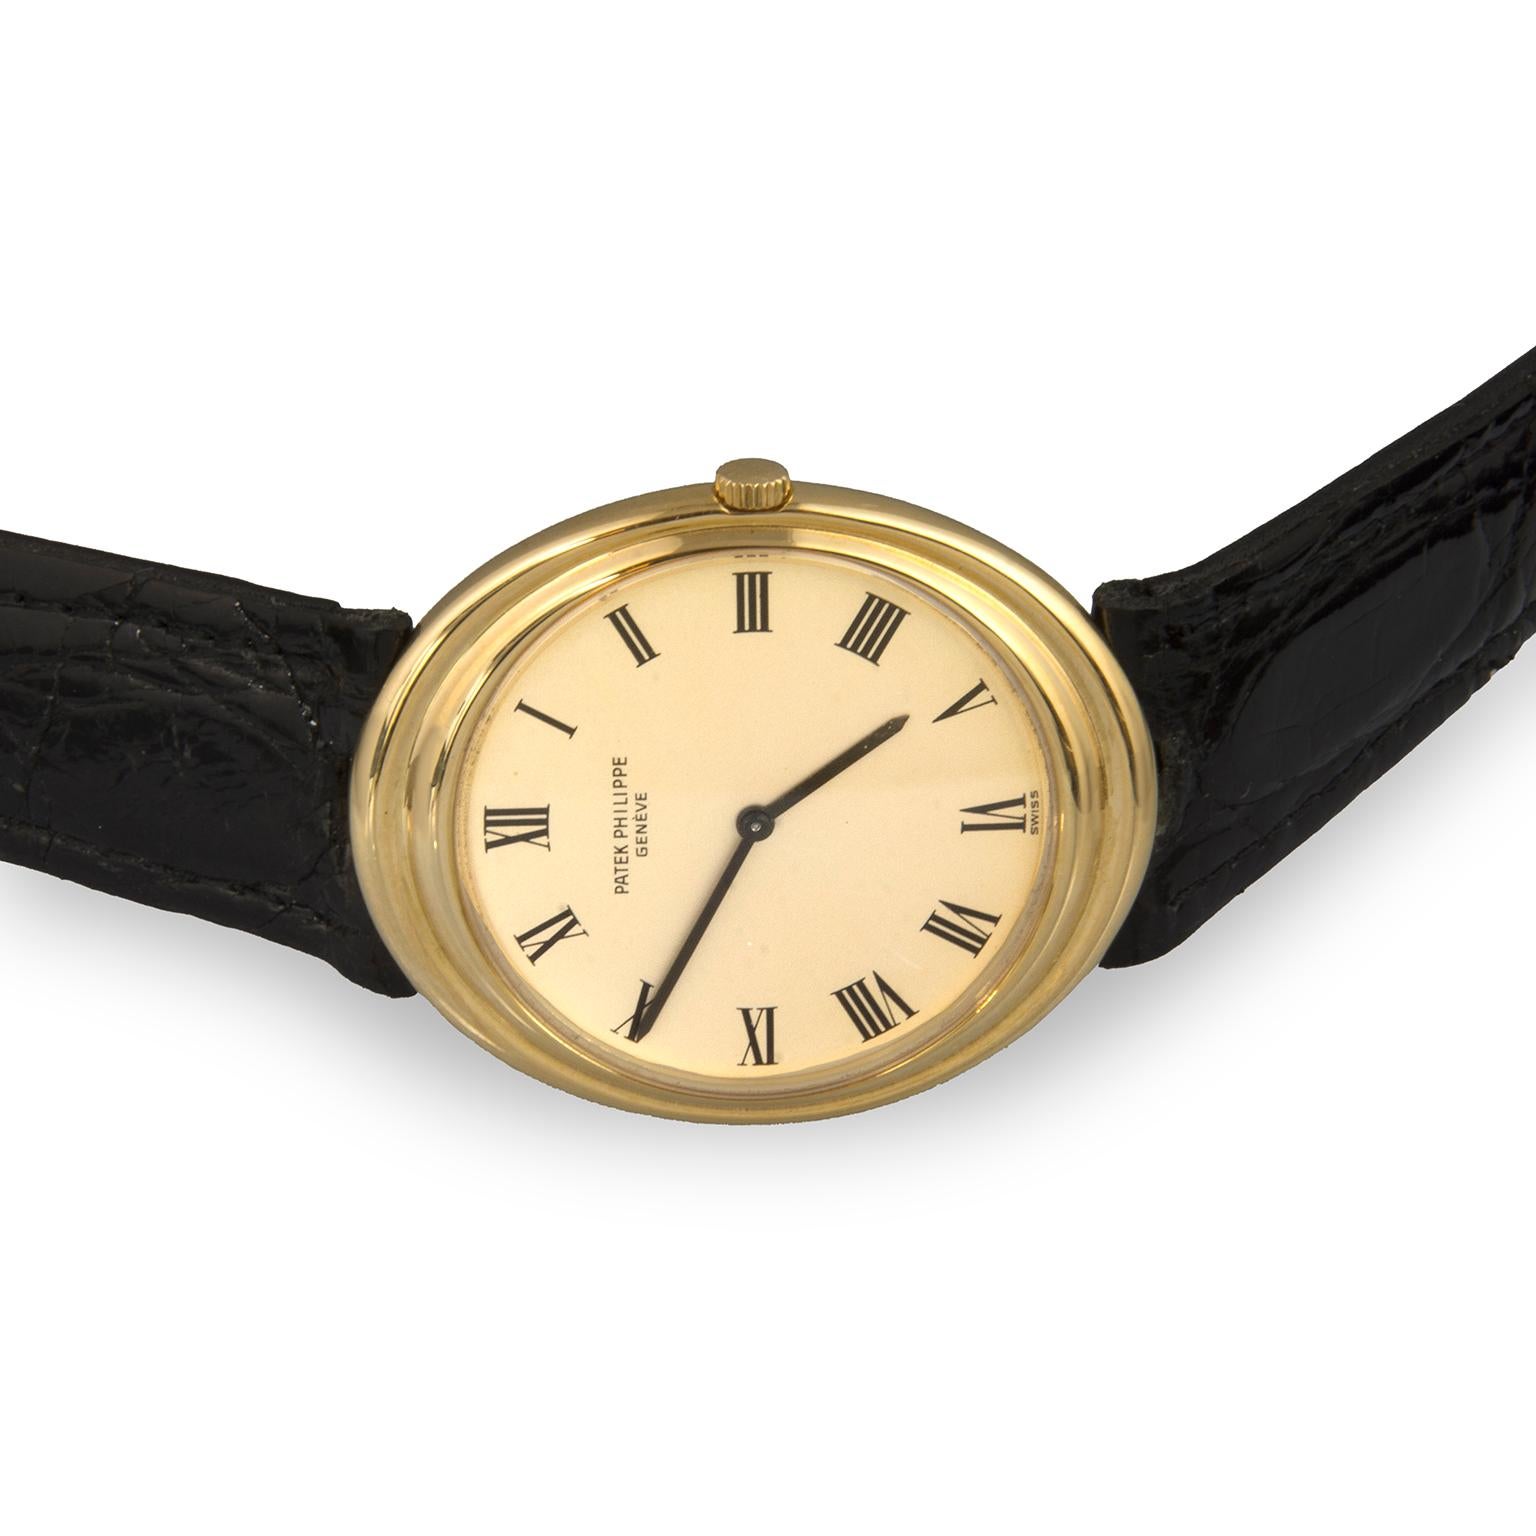 Patek Philippe 18 karat yellow gold wristwatch with original leather strap. Original certificate included